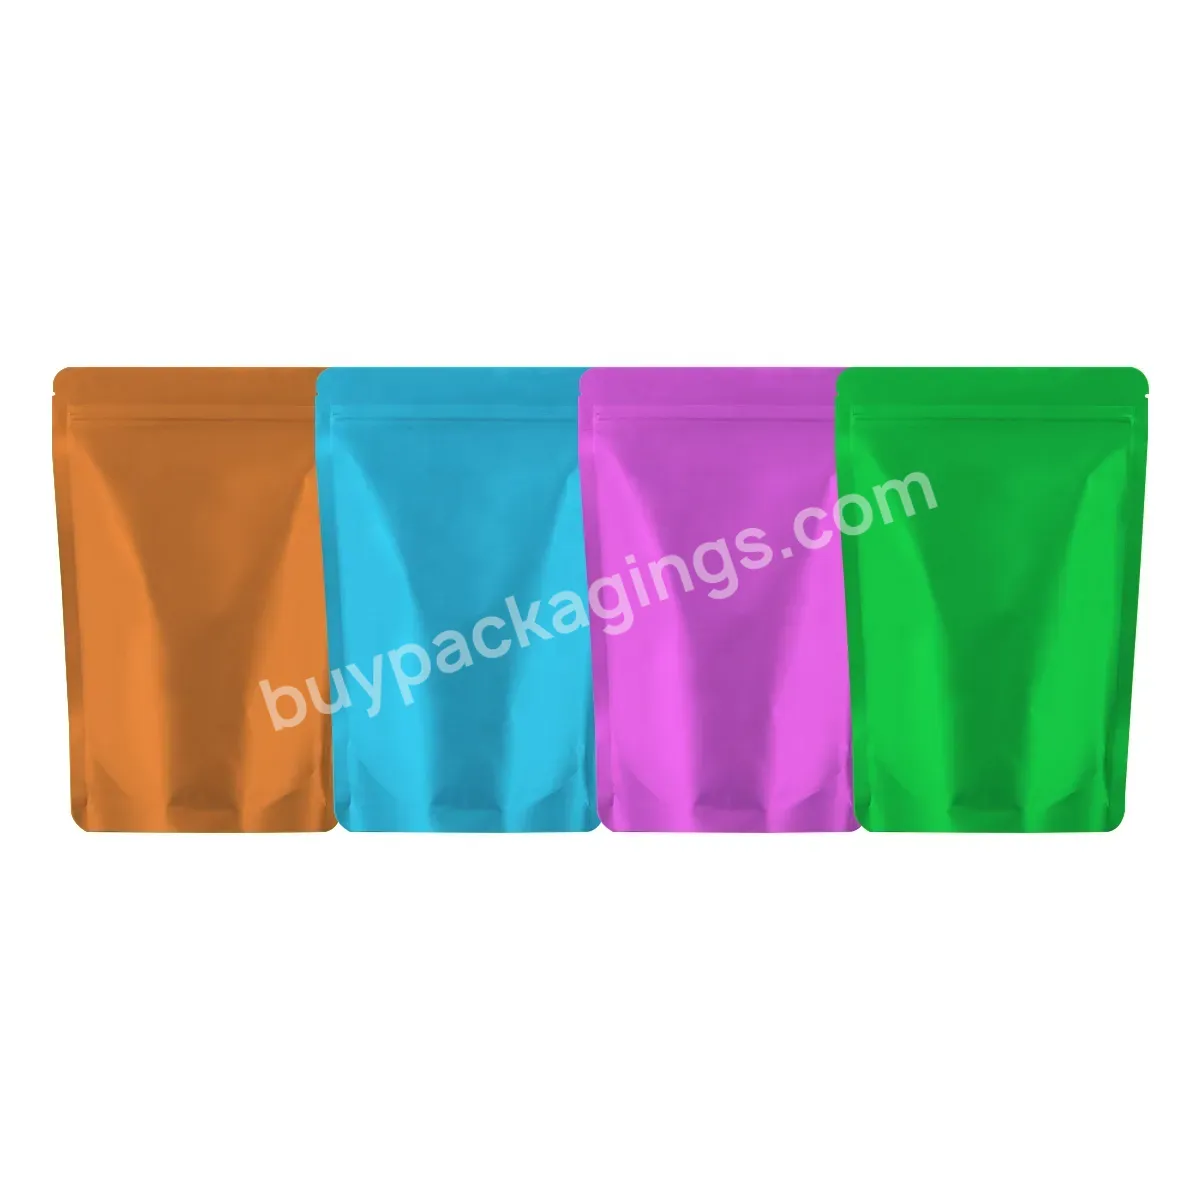 Custom Stand Up Zip Pouch Smell Proof Resealable Die Cut Holographic Bags 3.5g Mylar Bag - Buy 3.5g Mylar Bag,Stand Up Zip Pouch,Posh Bags.